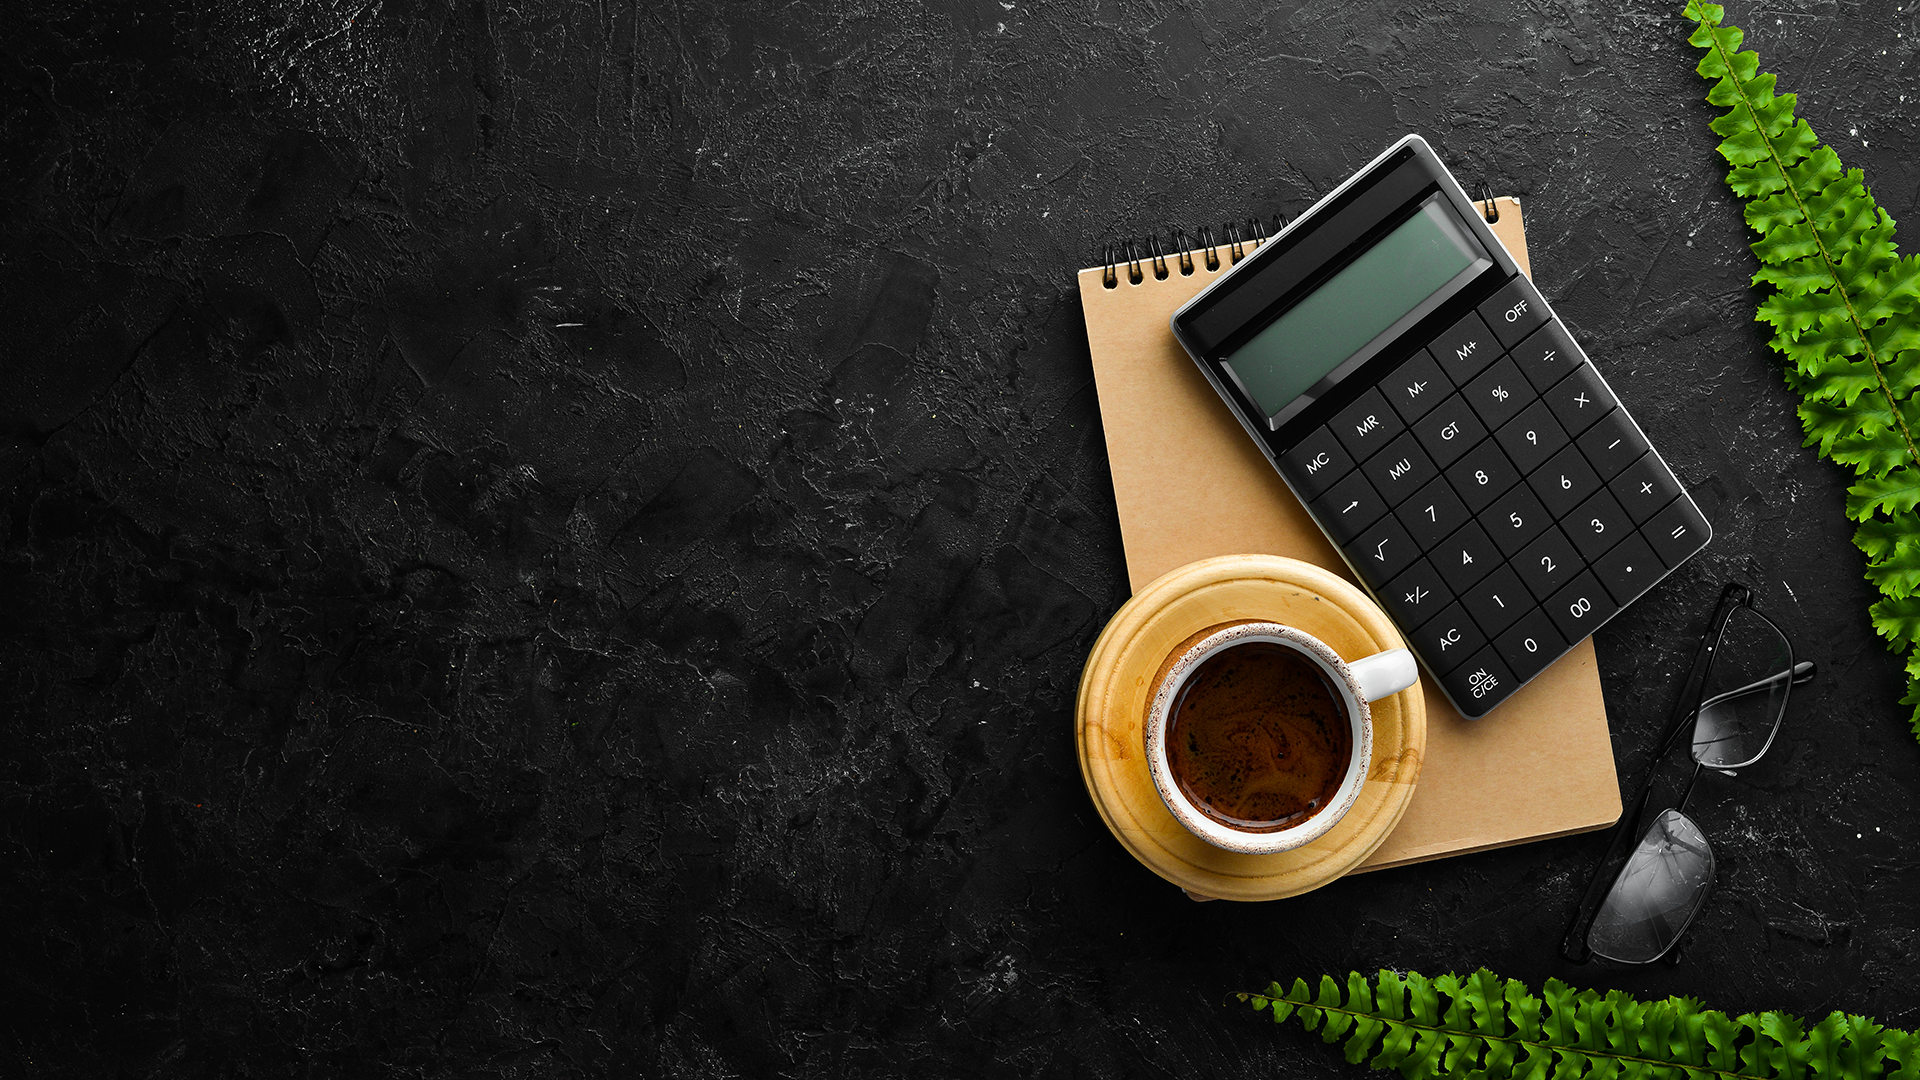 calculator, coffee, notebook, glasses, and ferns on a table